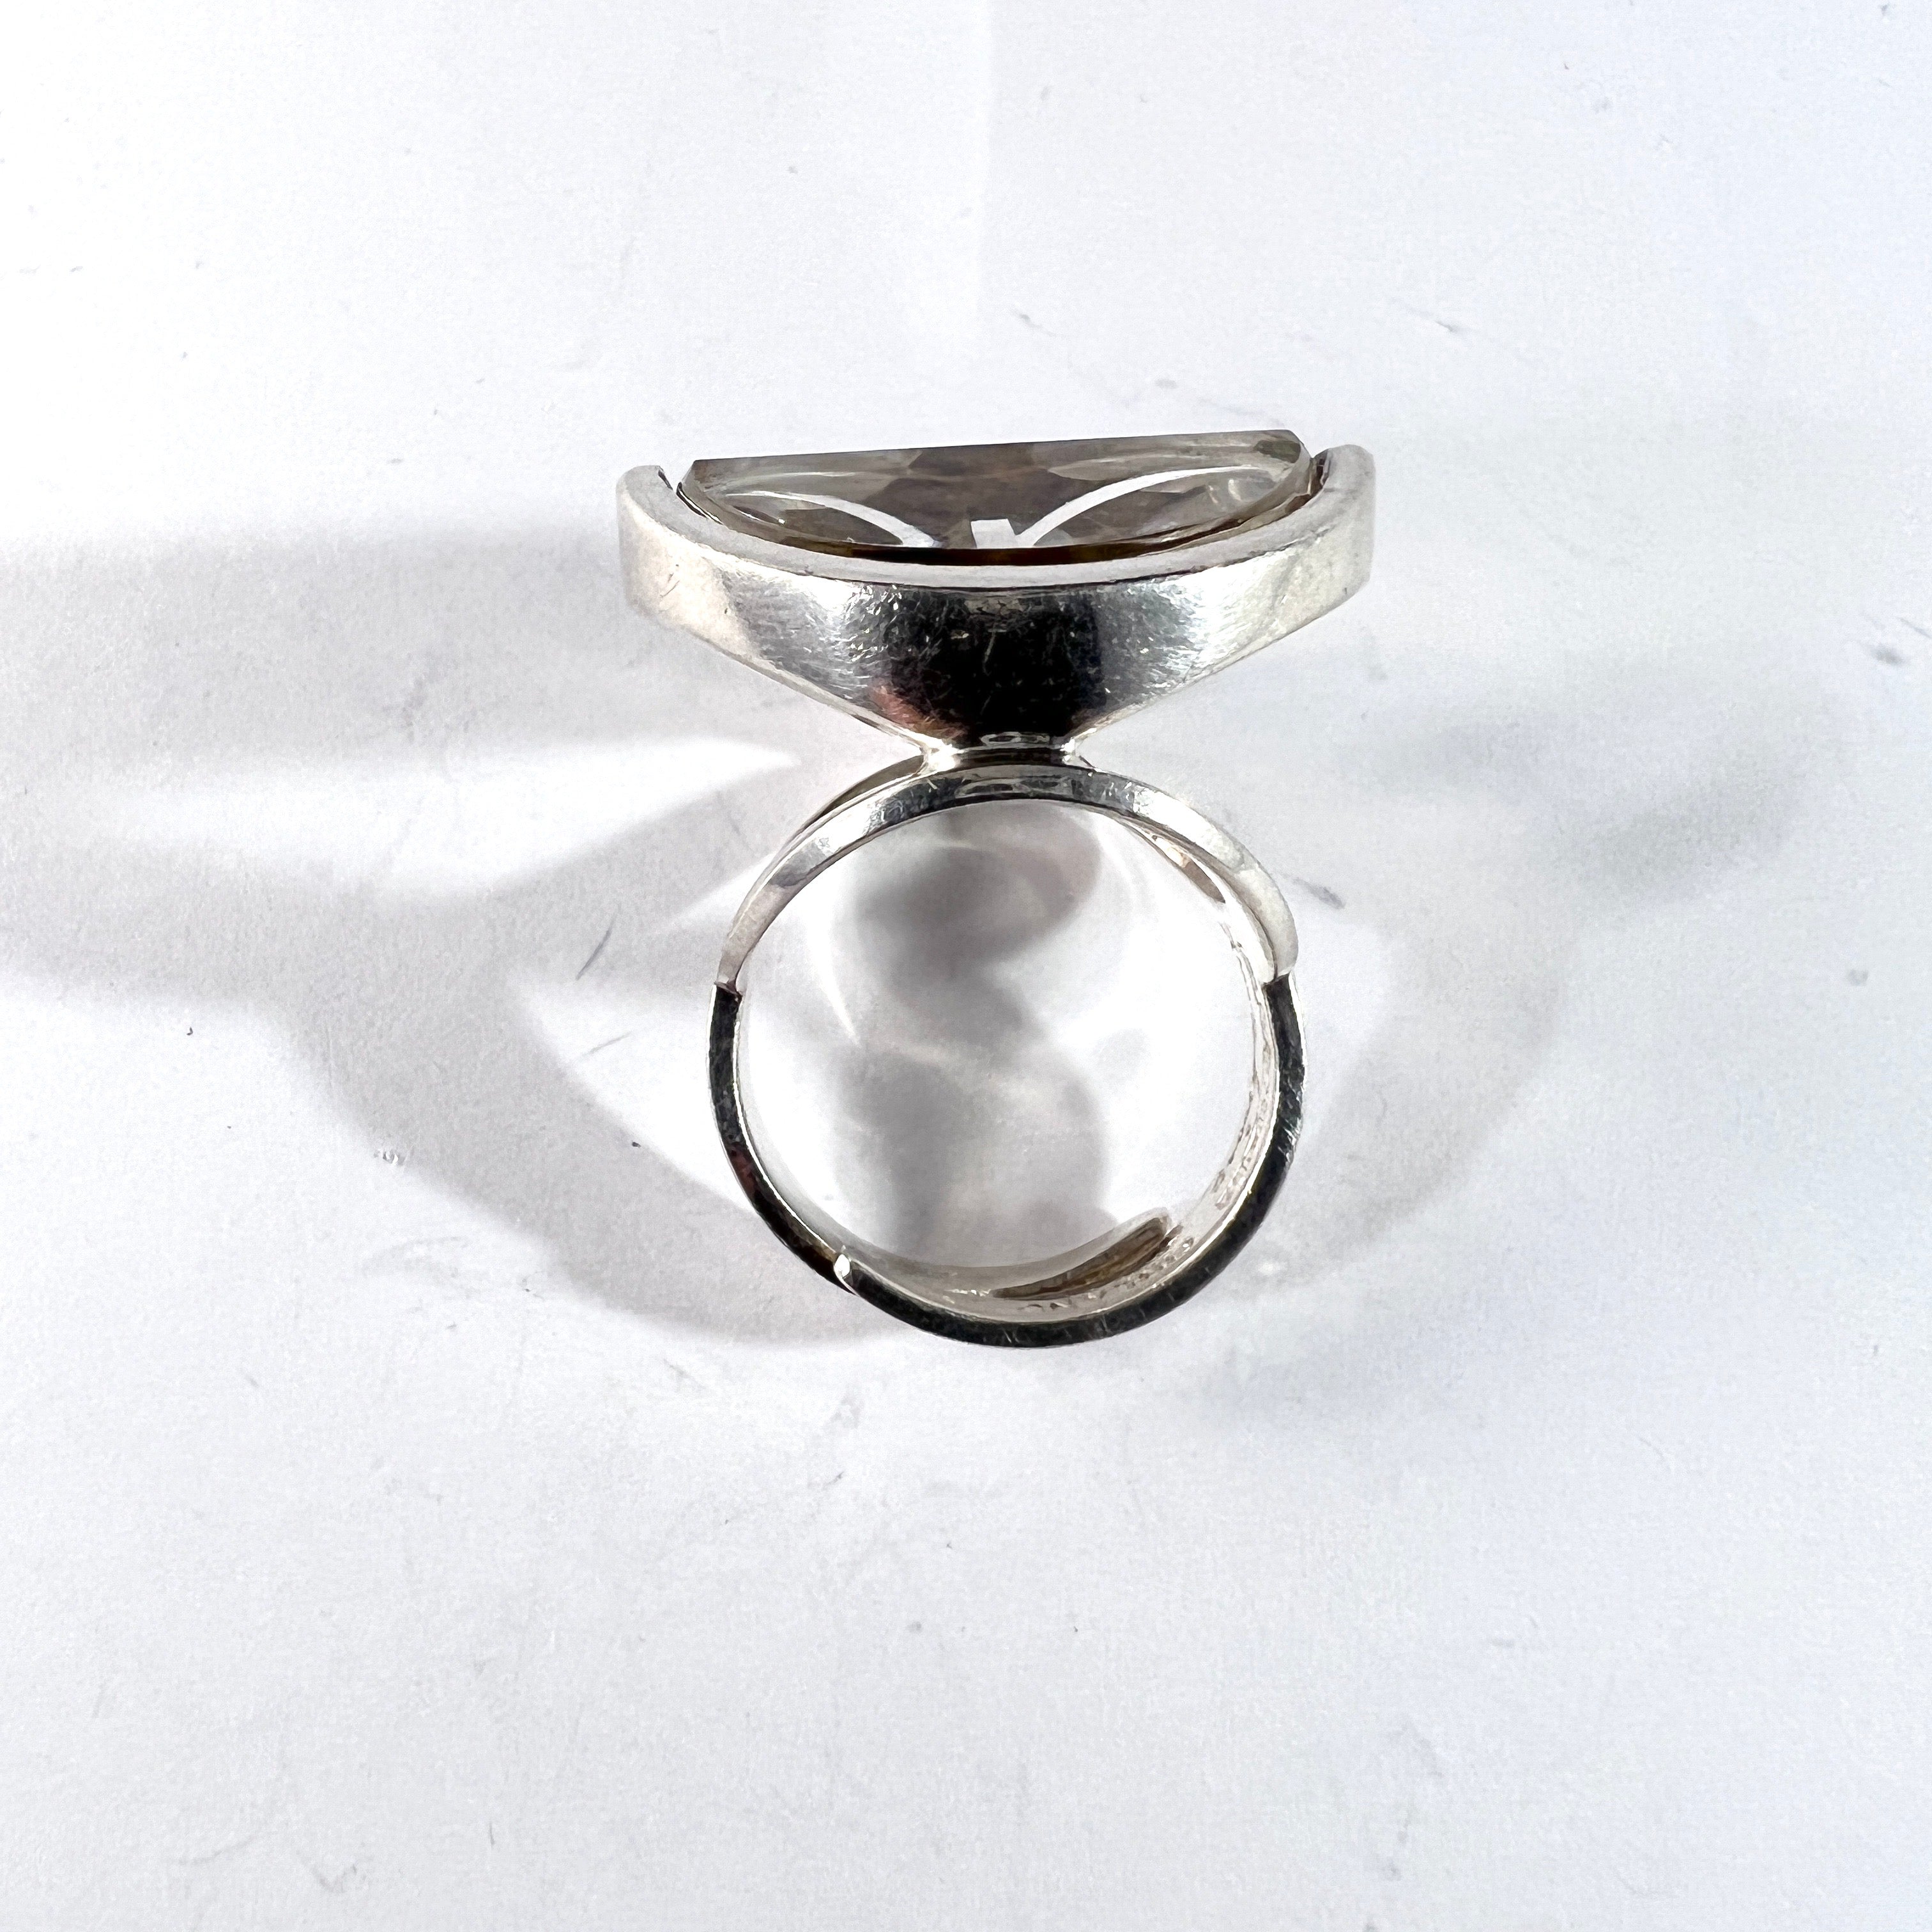 Jorma Laine for Turun Hopea Finland 1973. Iconic Sterling Silver Rock Crystal Ring.